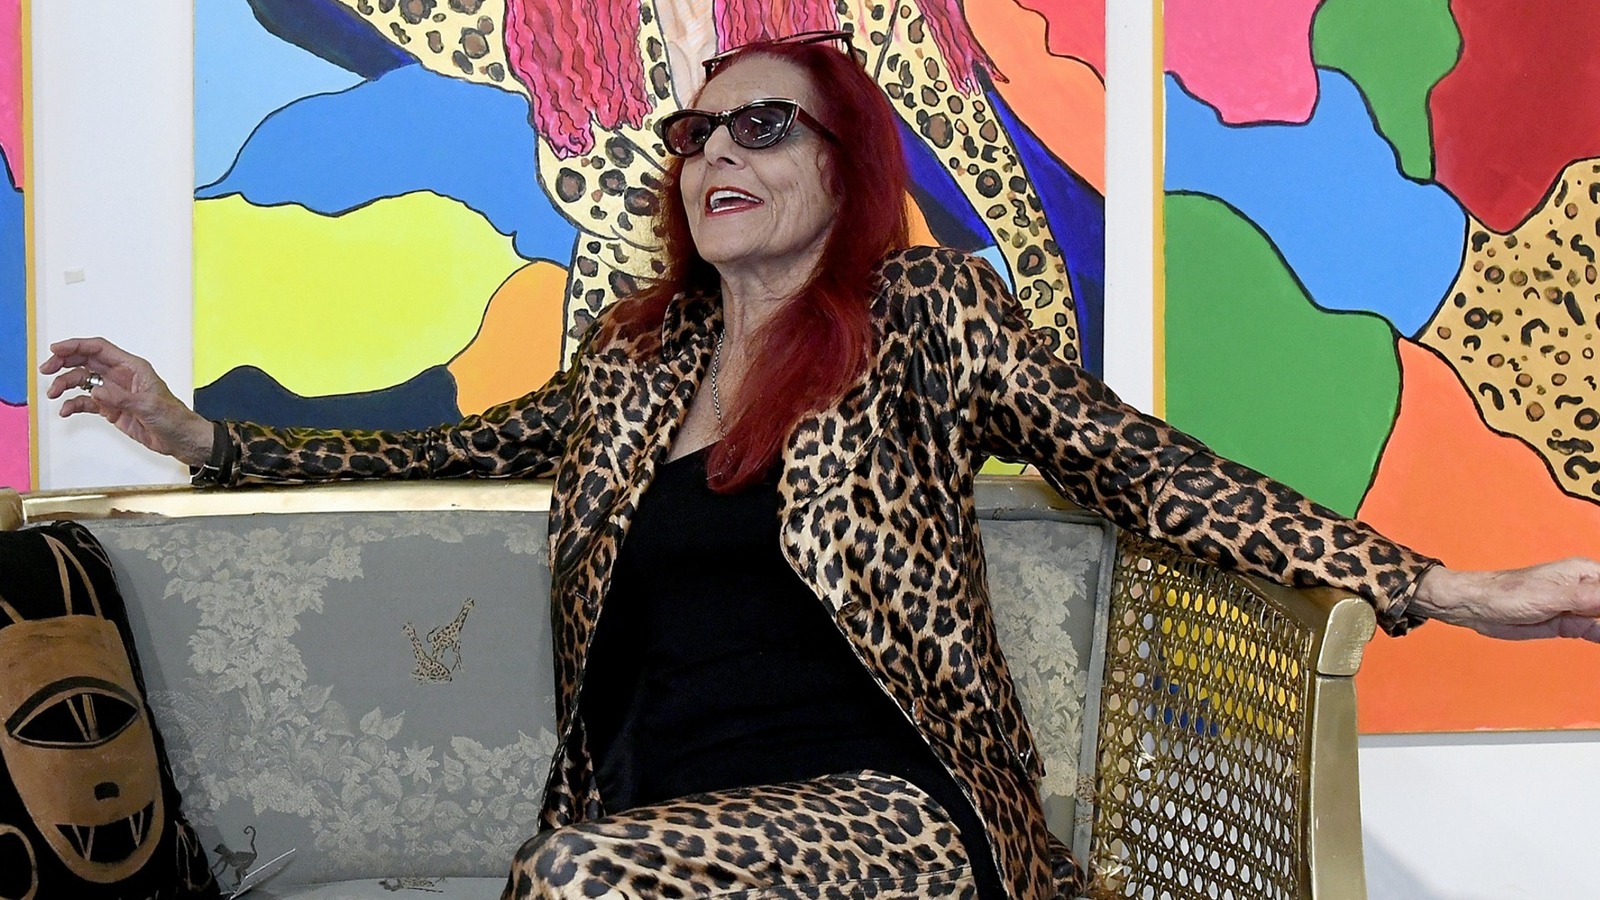 Pat in the City: My Life of Fashion, Style, and Breaking All the Rules by  Patricia Field